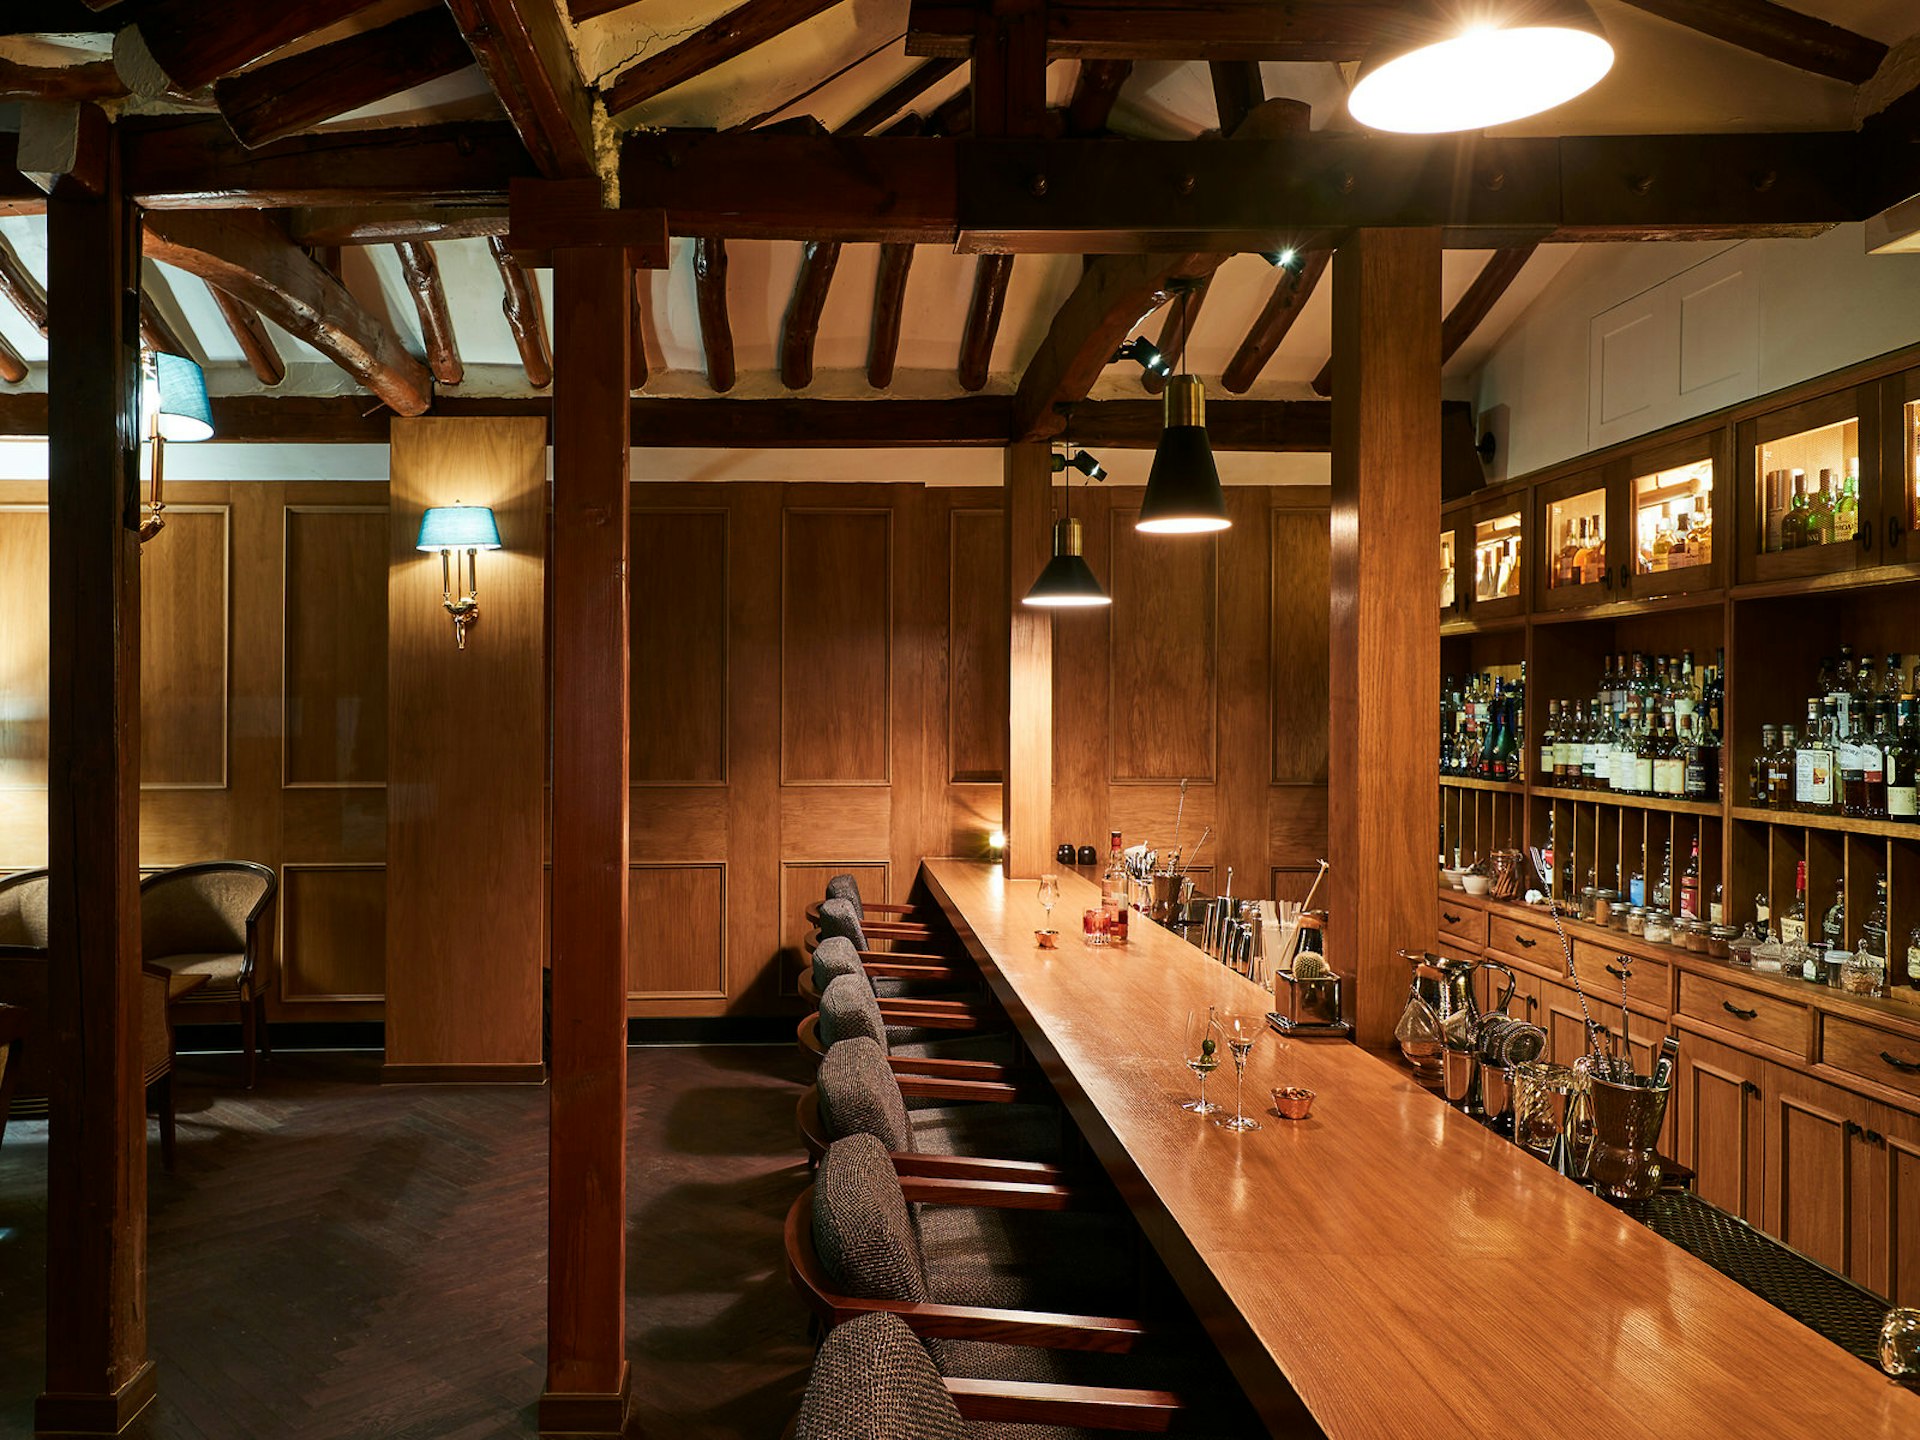 Wooden bar with seats along the bar, wooden beams and bottles of spirits